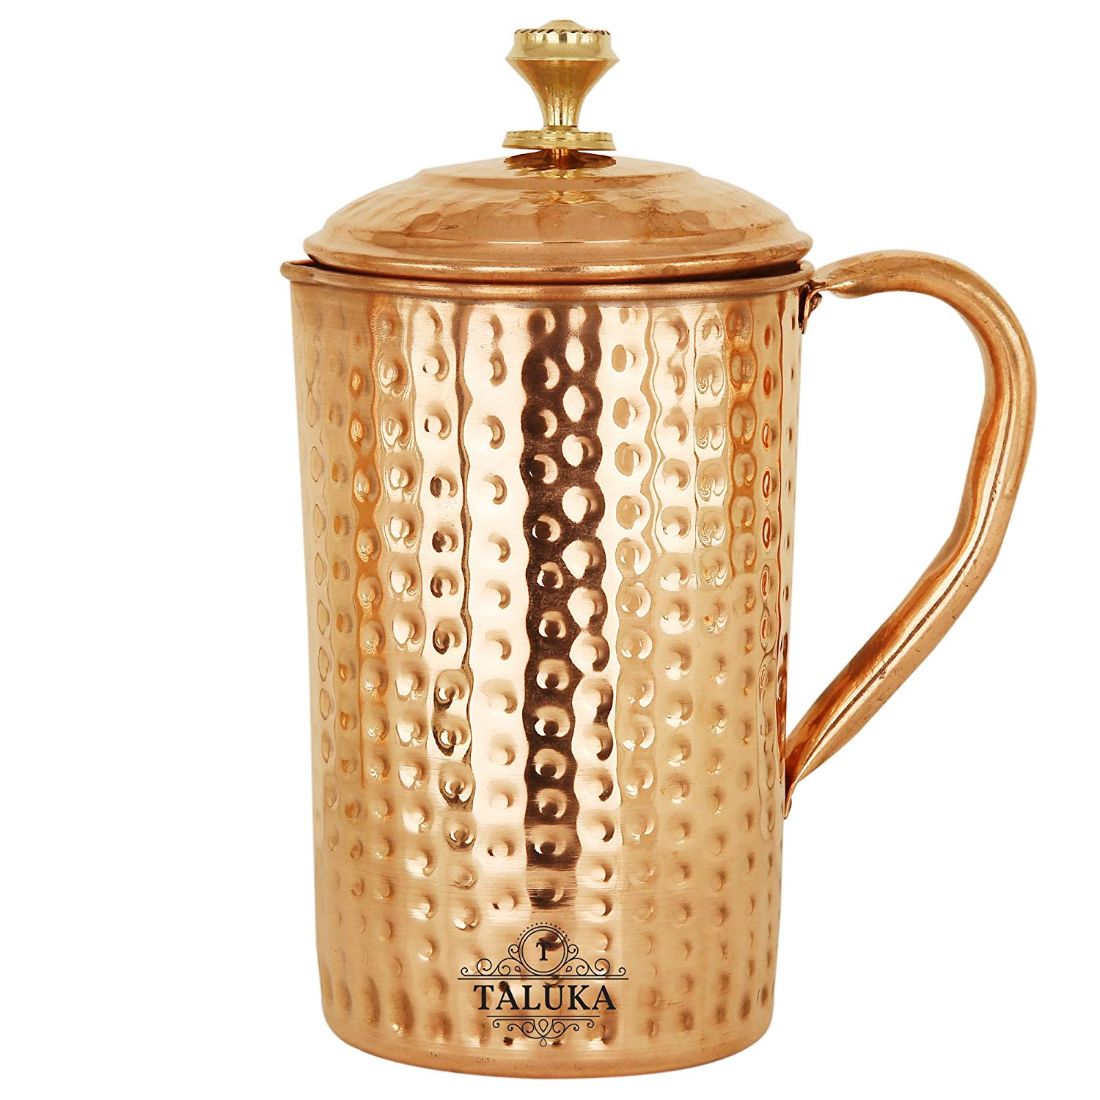 Copper Hammered Set of 1 Jug Pitcher 1700 ML with 1 Glass 300 ML - Storage Drinking Water Home Hotel Restaurant Tableware Drinkware